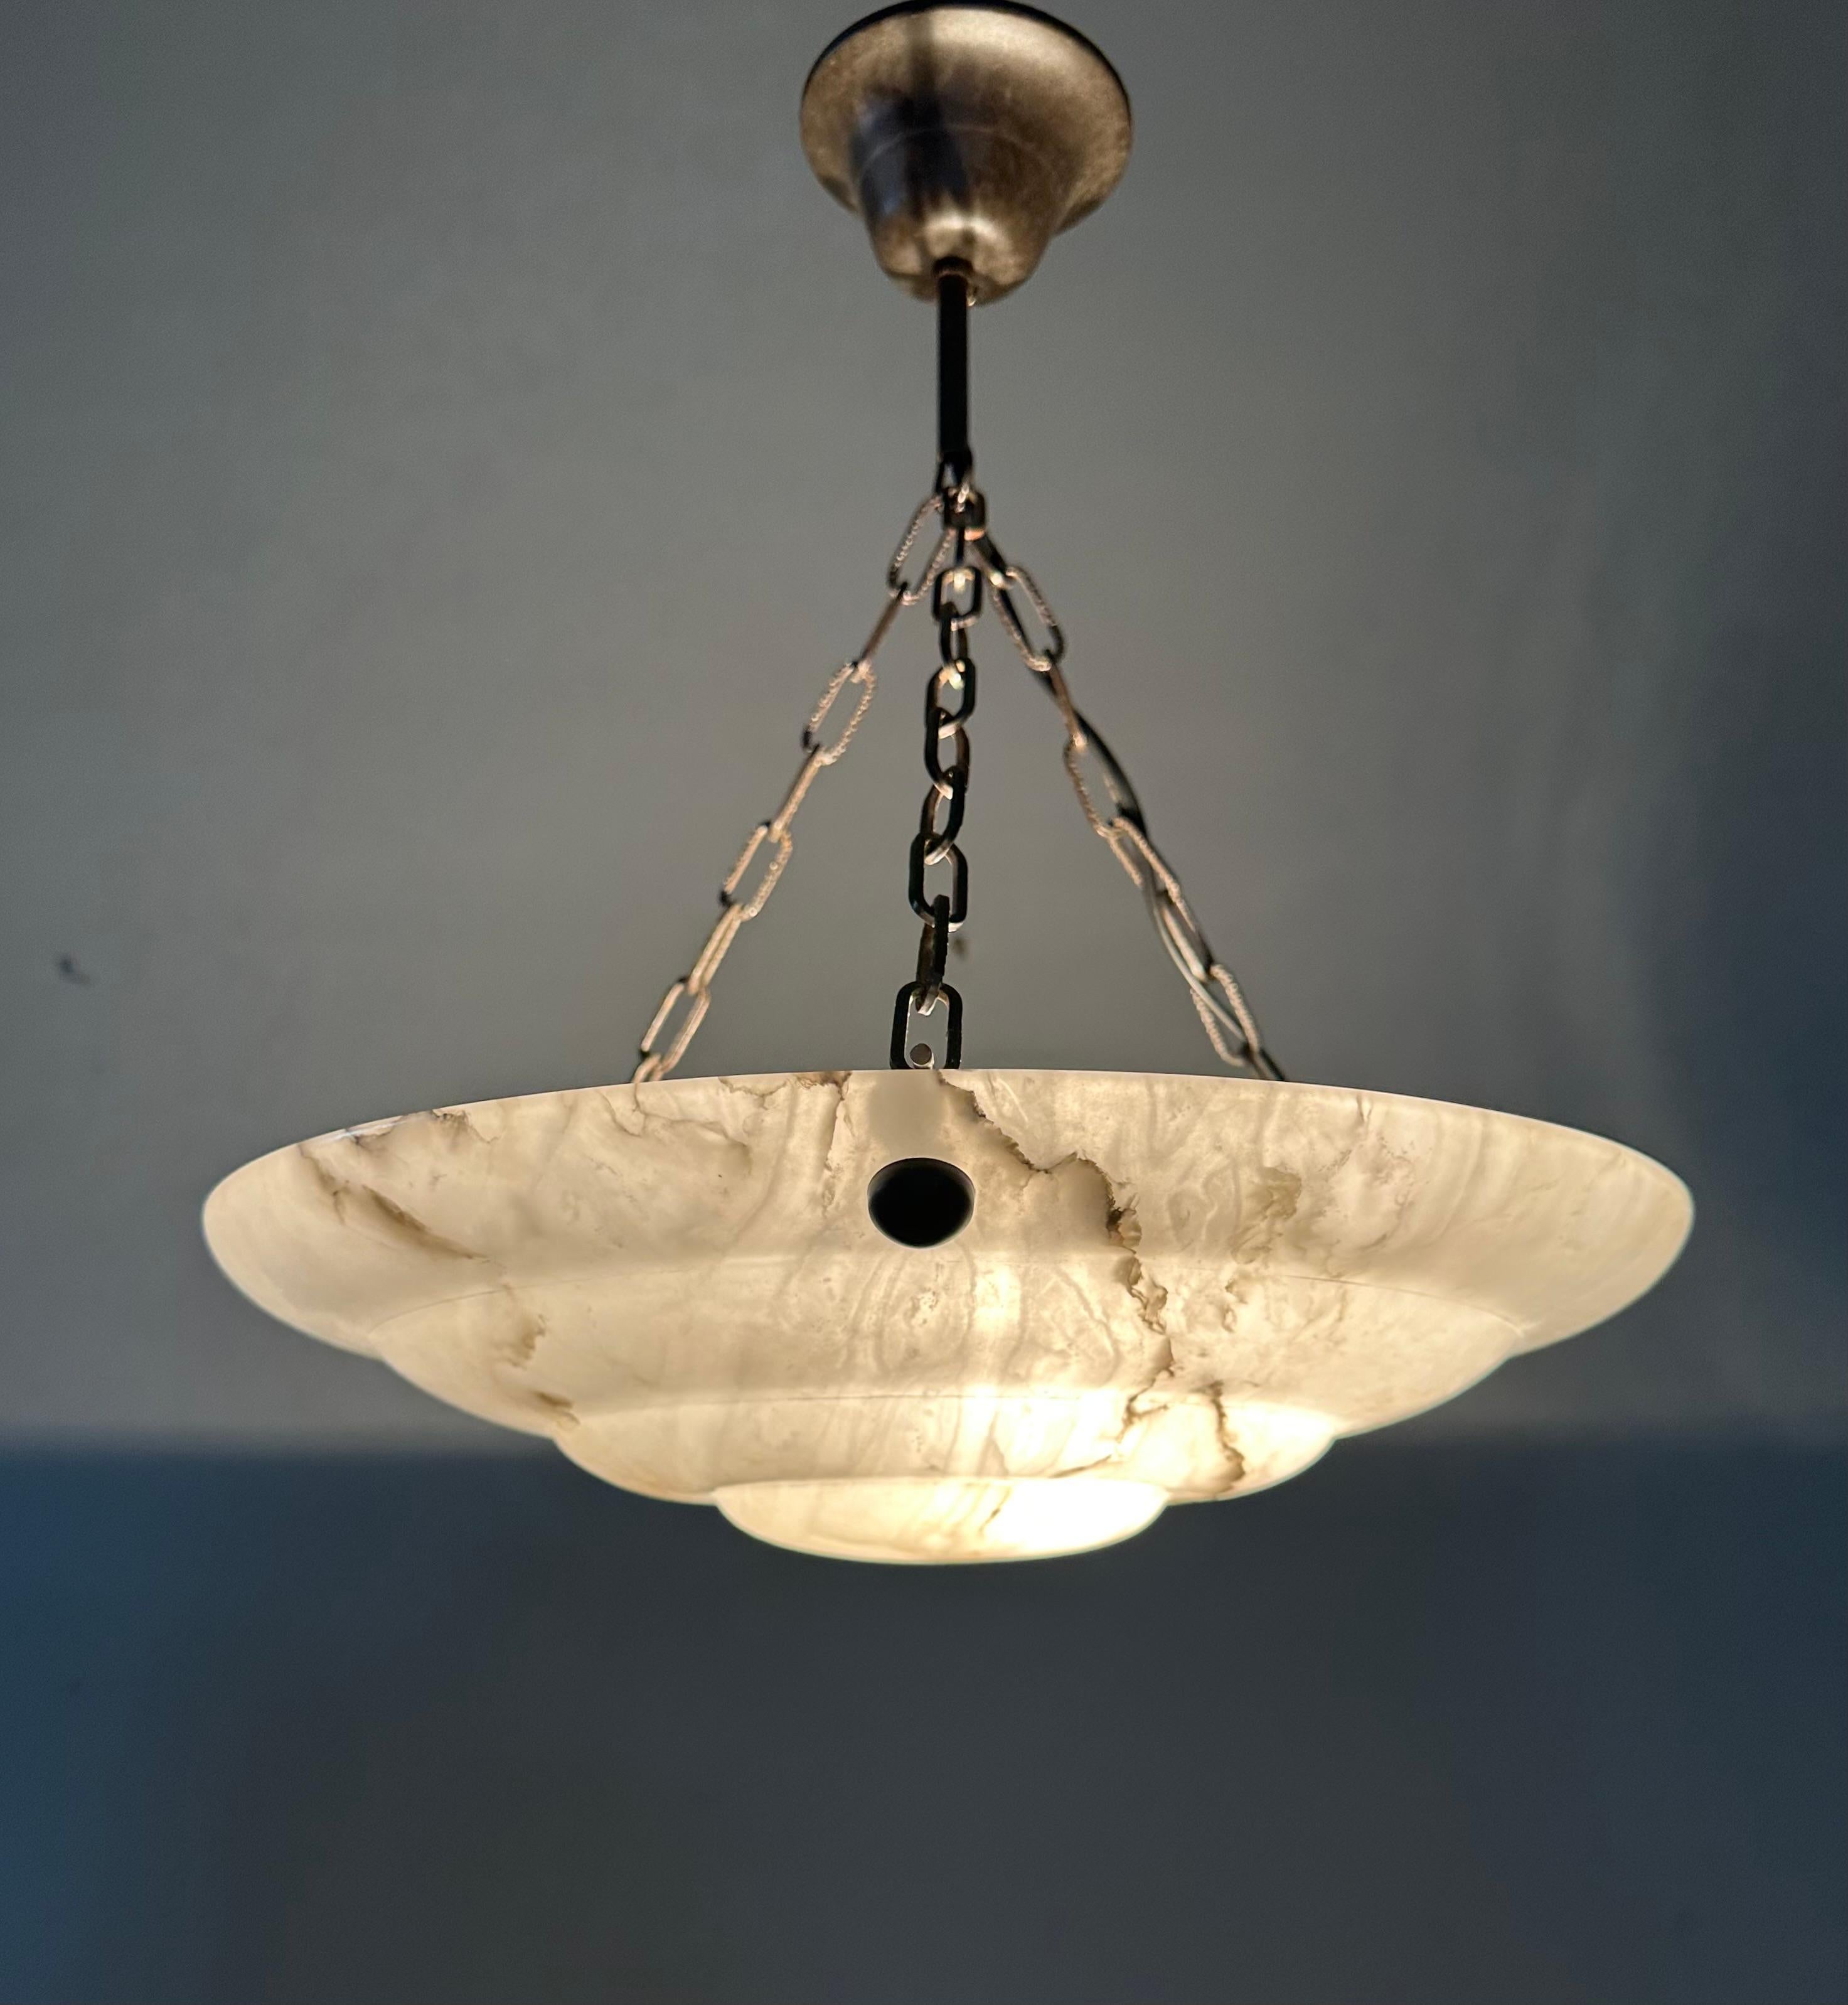 Pure Art Deco and Mint Condition White & Black Layered Alabaster Pendant Light For Sale 6